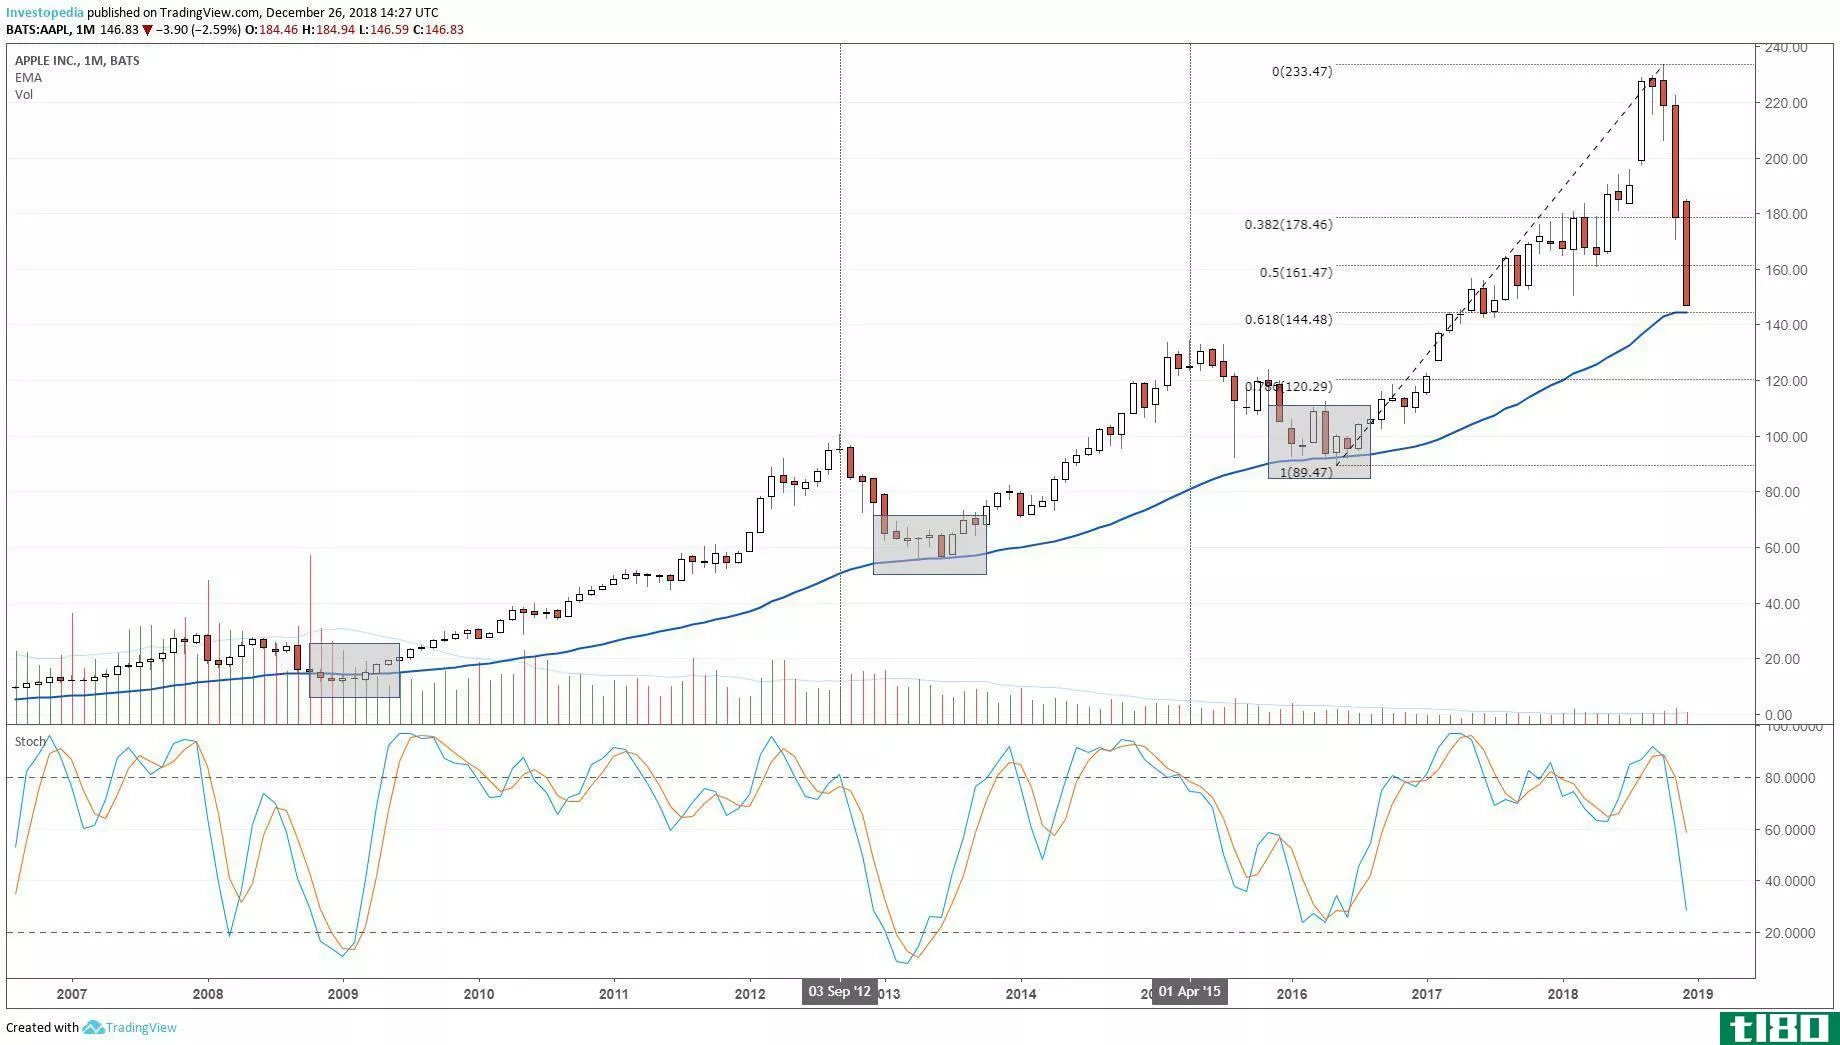 Technical chart showing the price performance of Apple Inc. (AAPL) stock